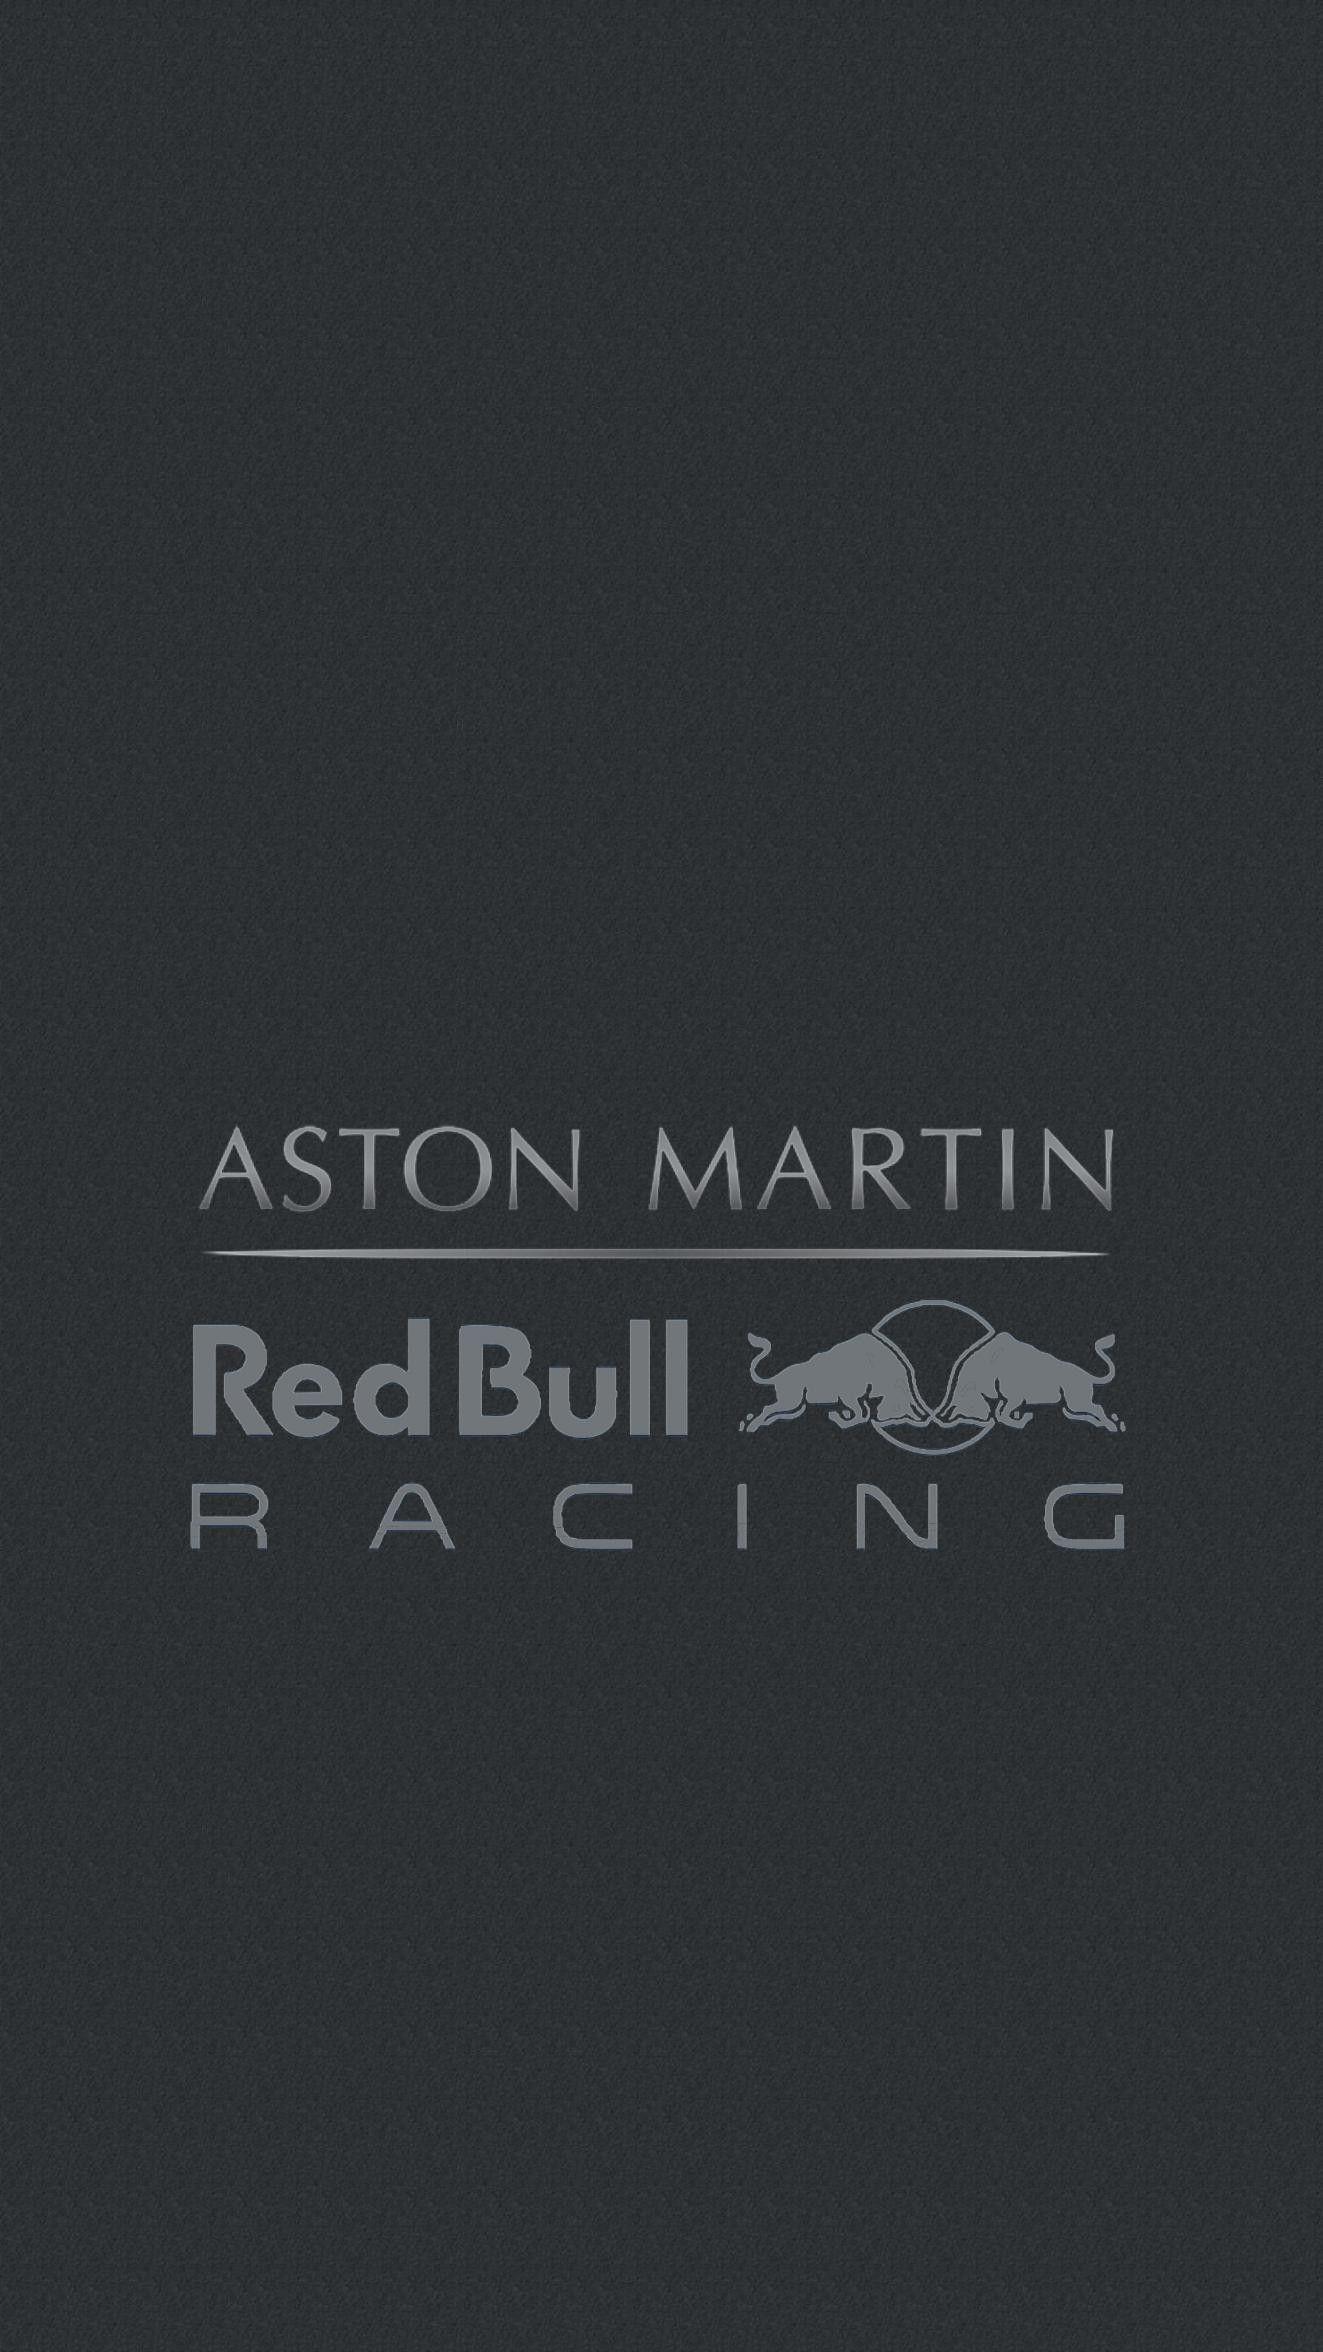 Red Bull Logo Iphone Wallpapers